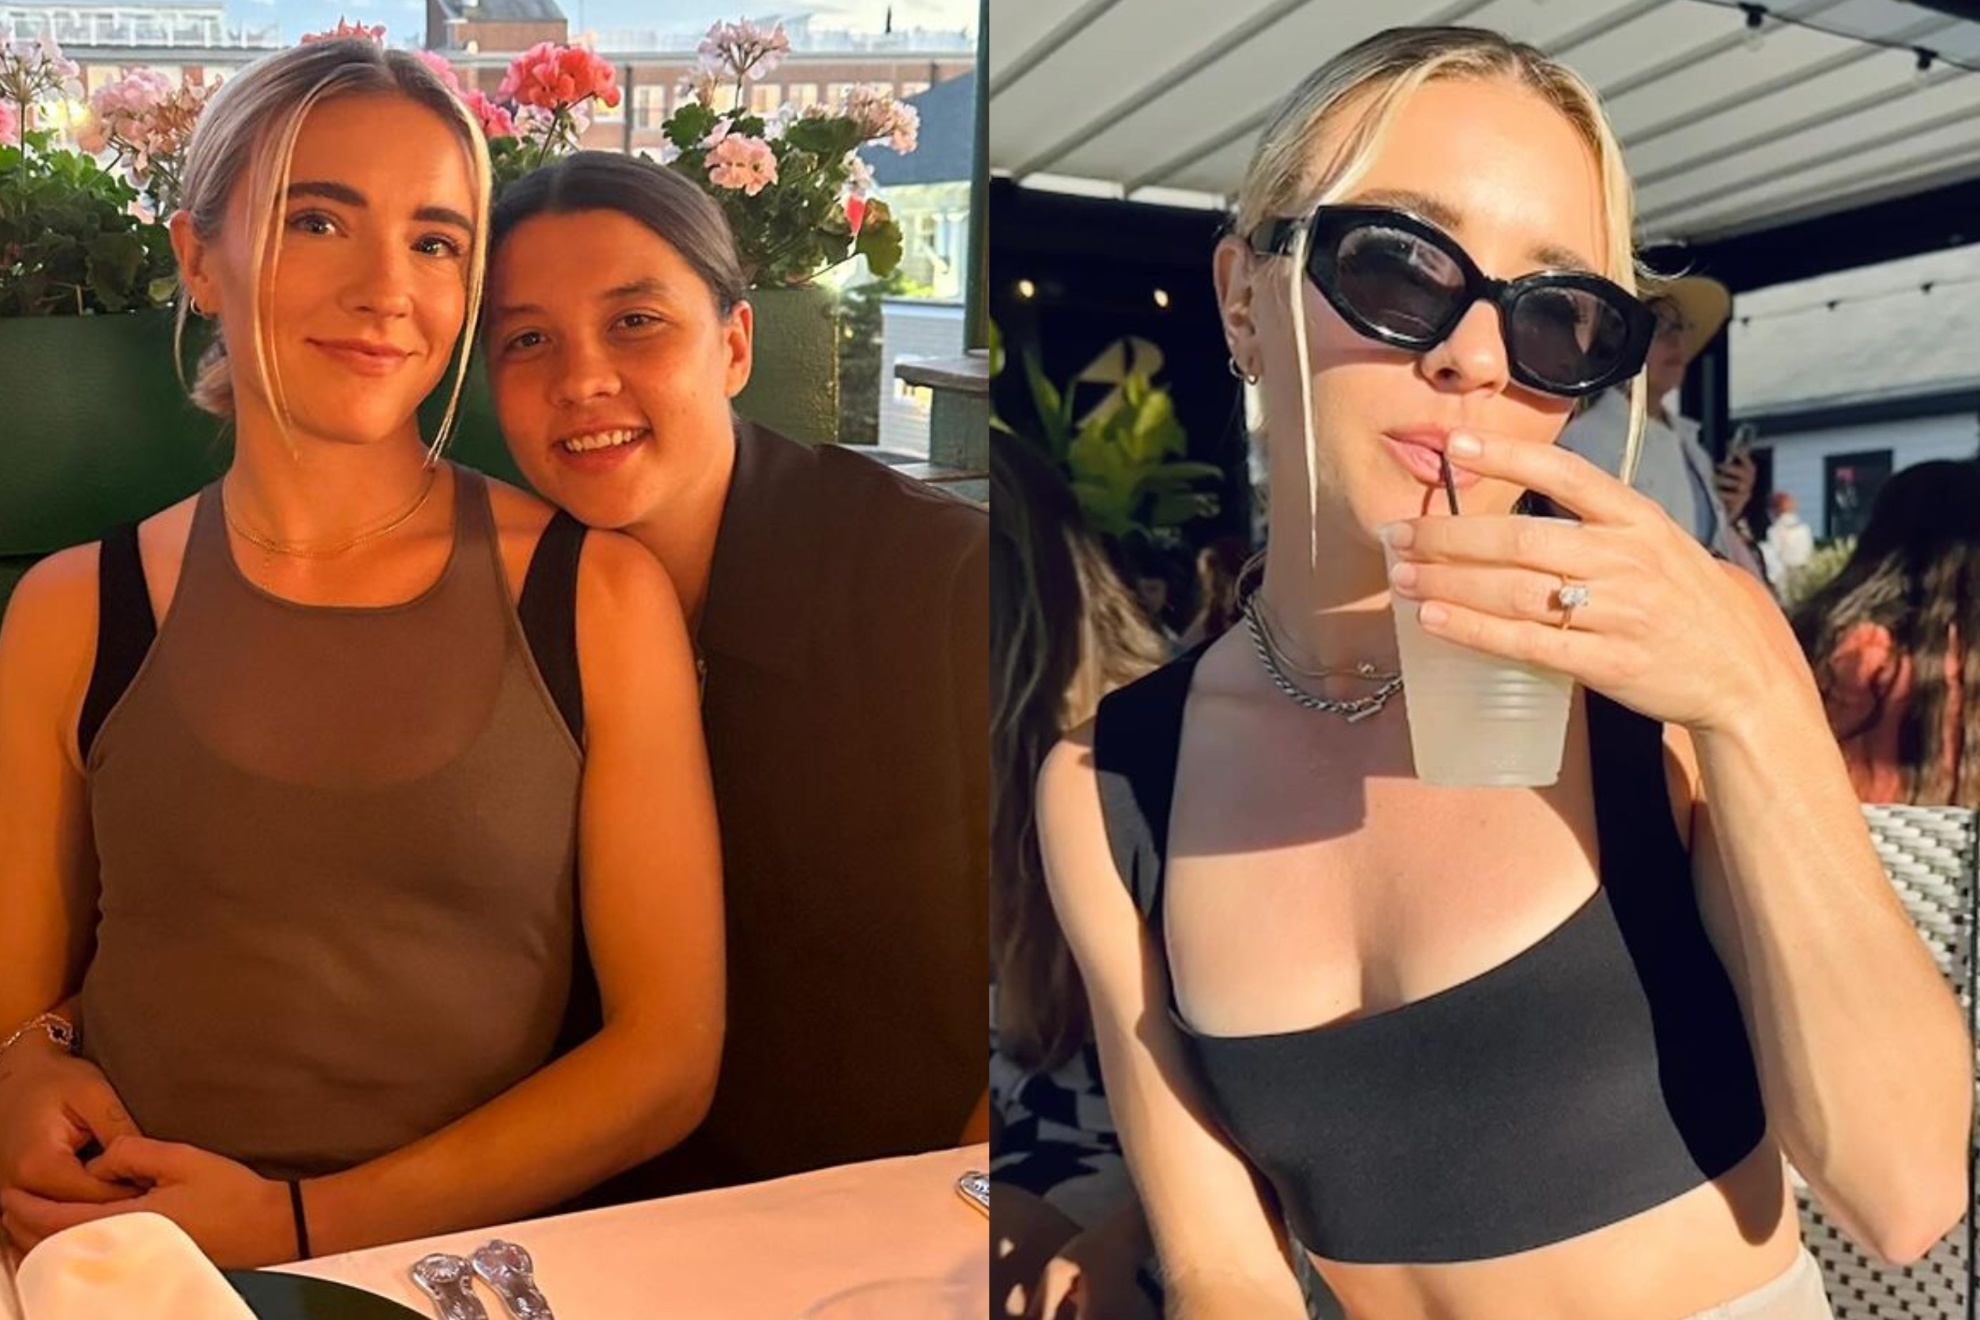 USWNT's Kristie Mewis confirmed her engagement to Australia's Sam Kerr